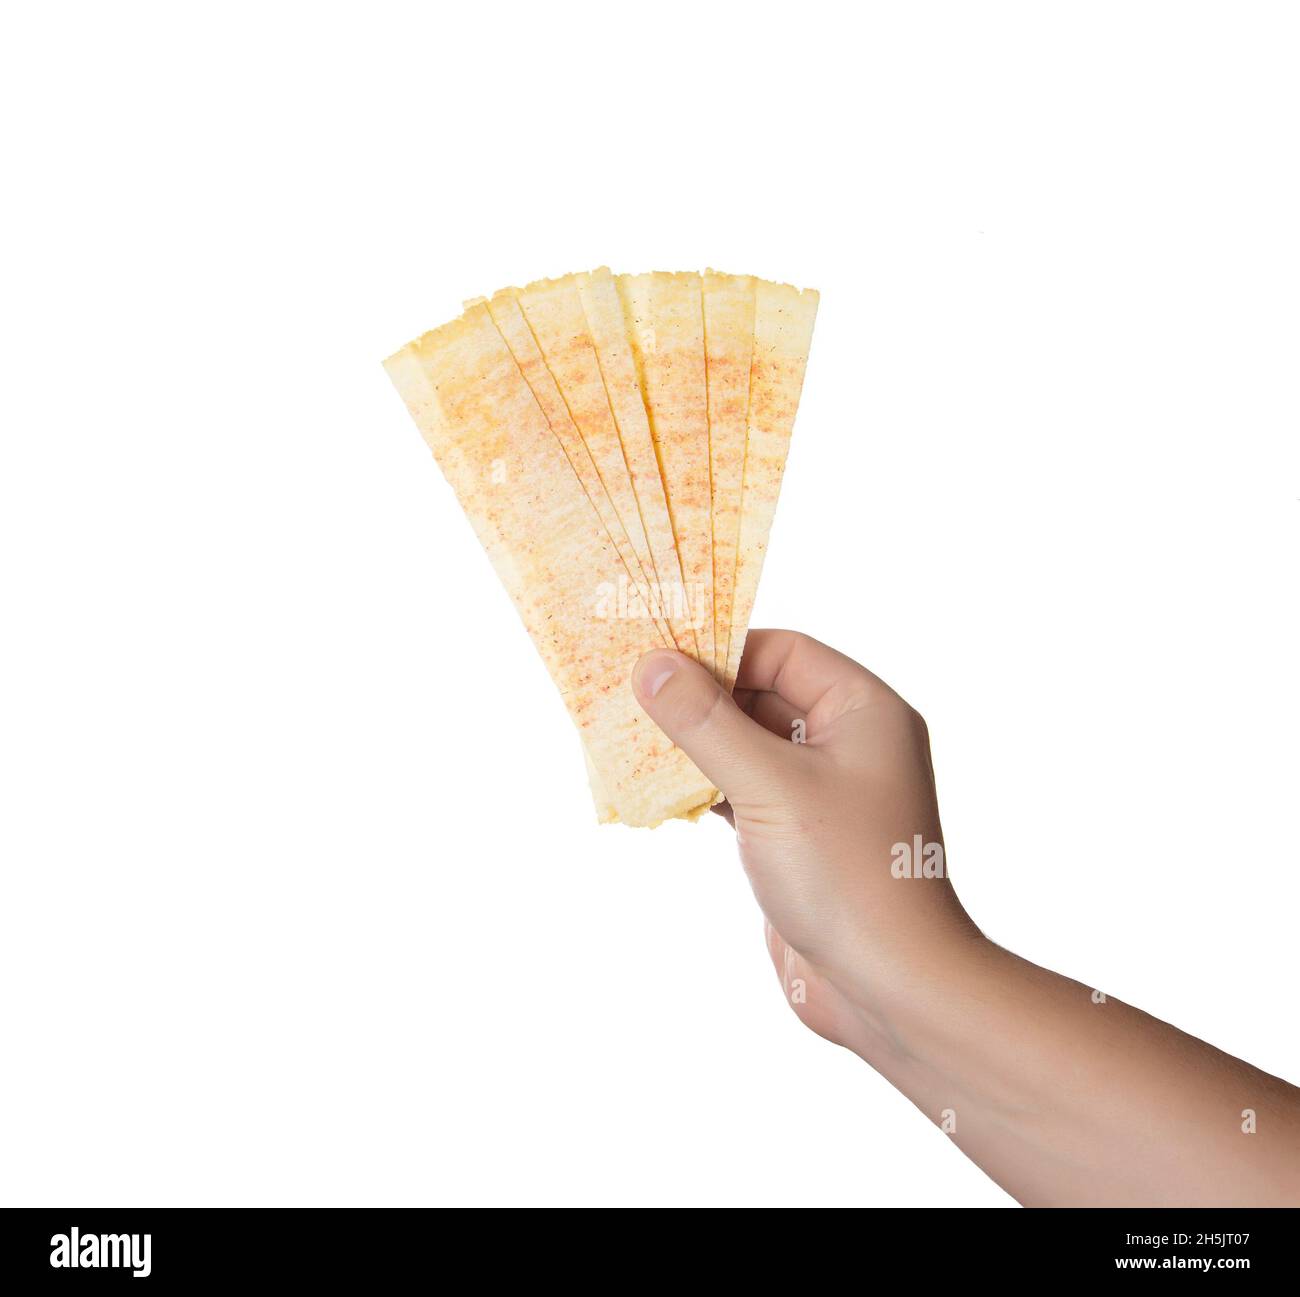 Yellow oblong chips in a man's hand on a white background, isolate.  Close-up Stock Photo - Alamy